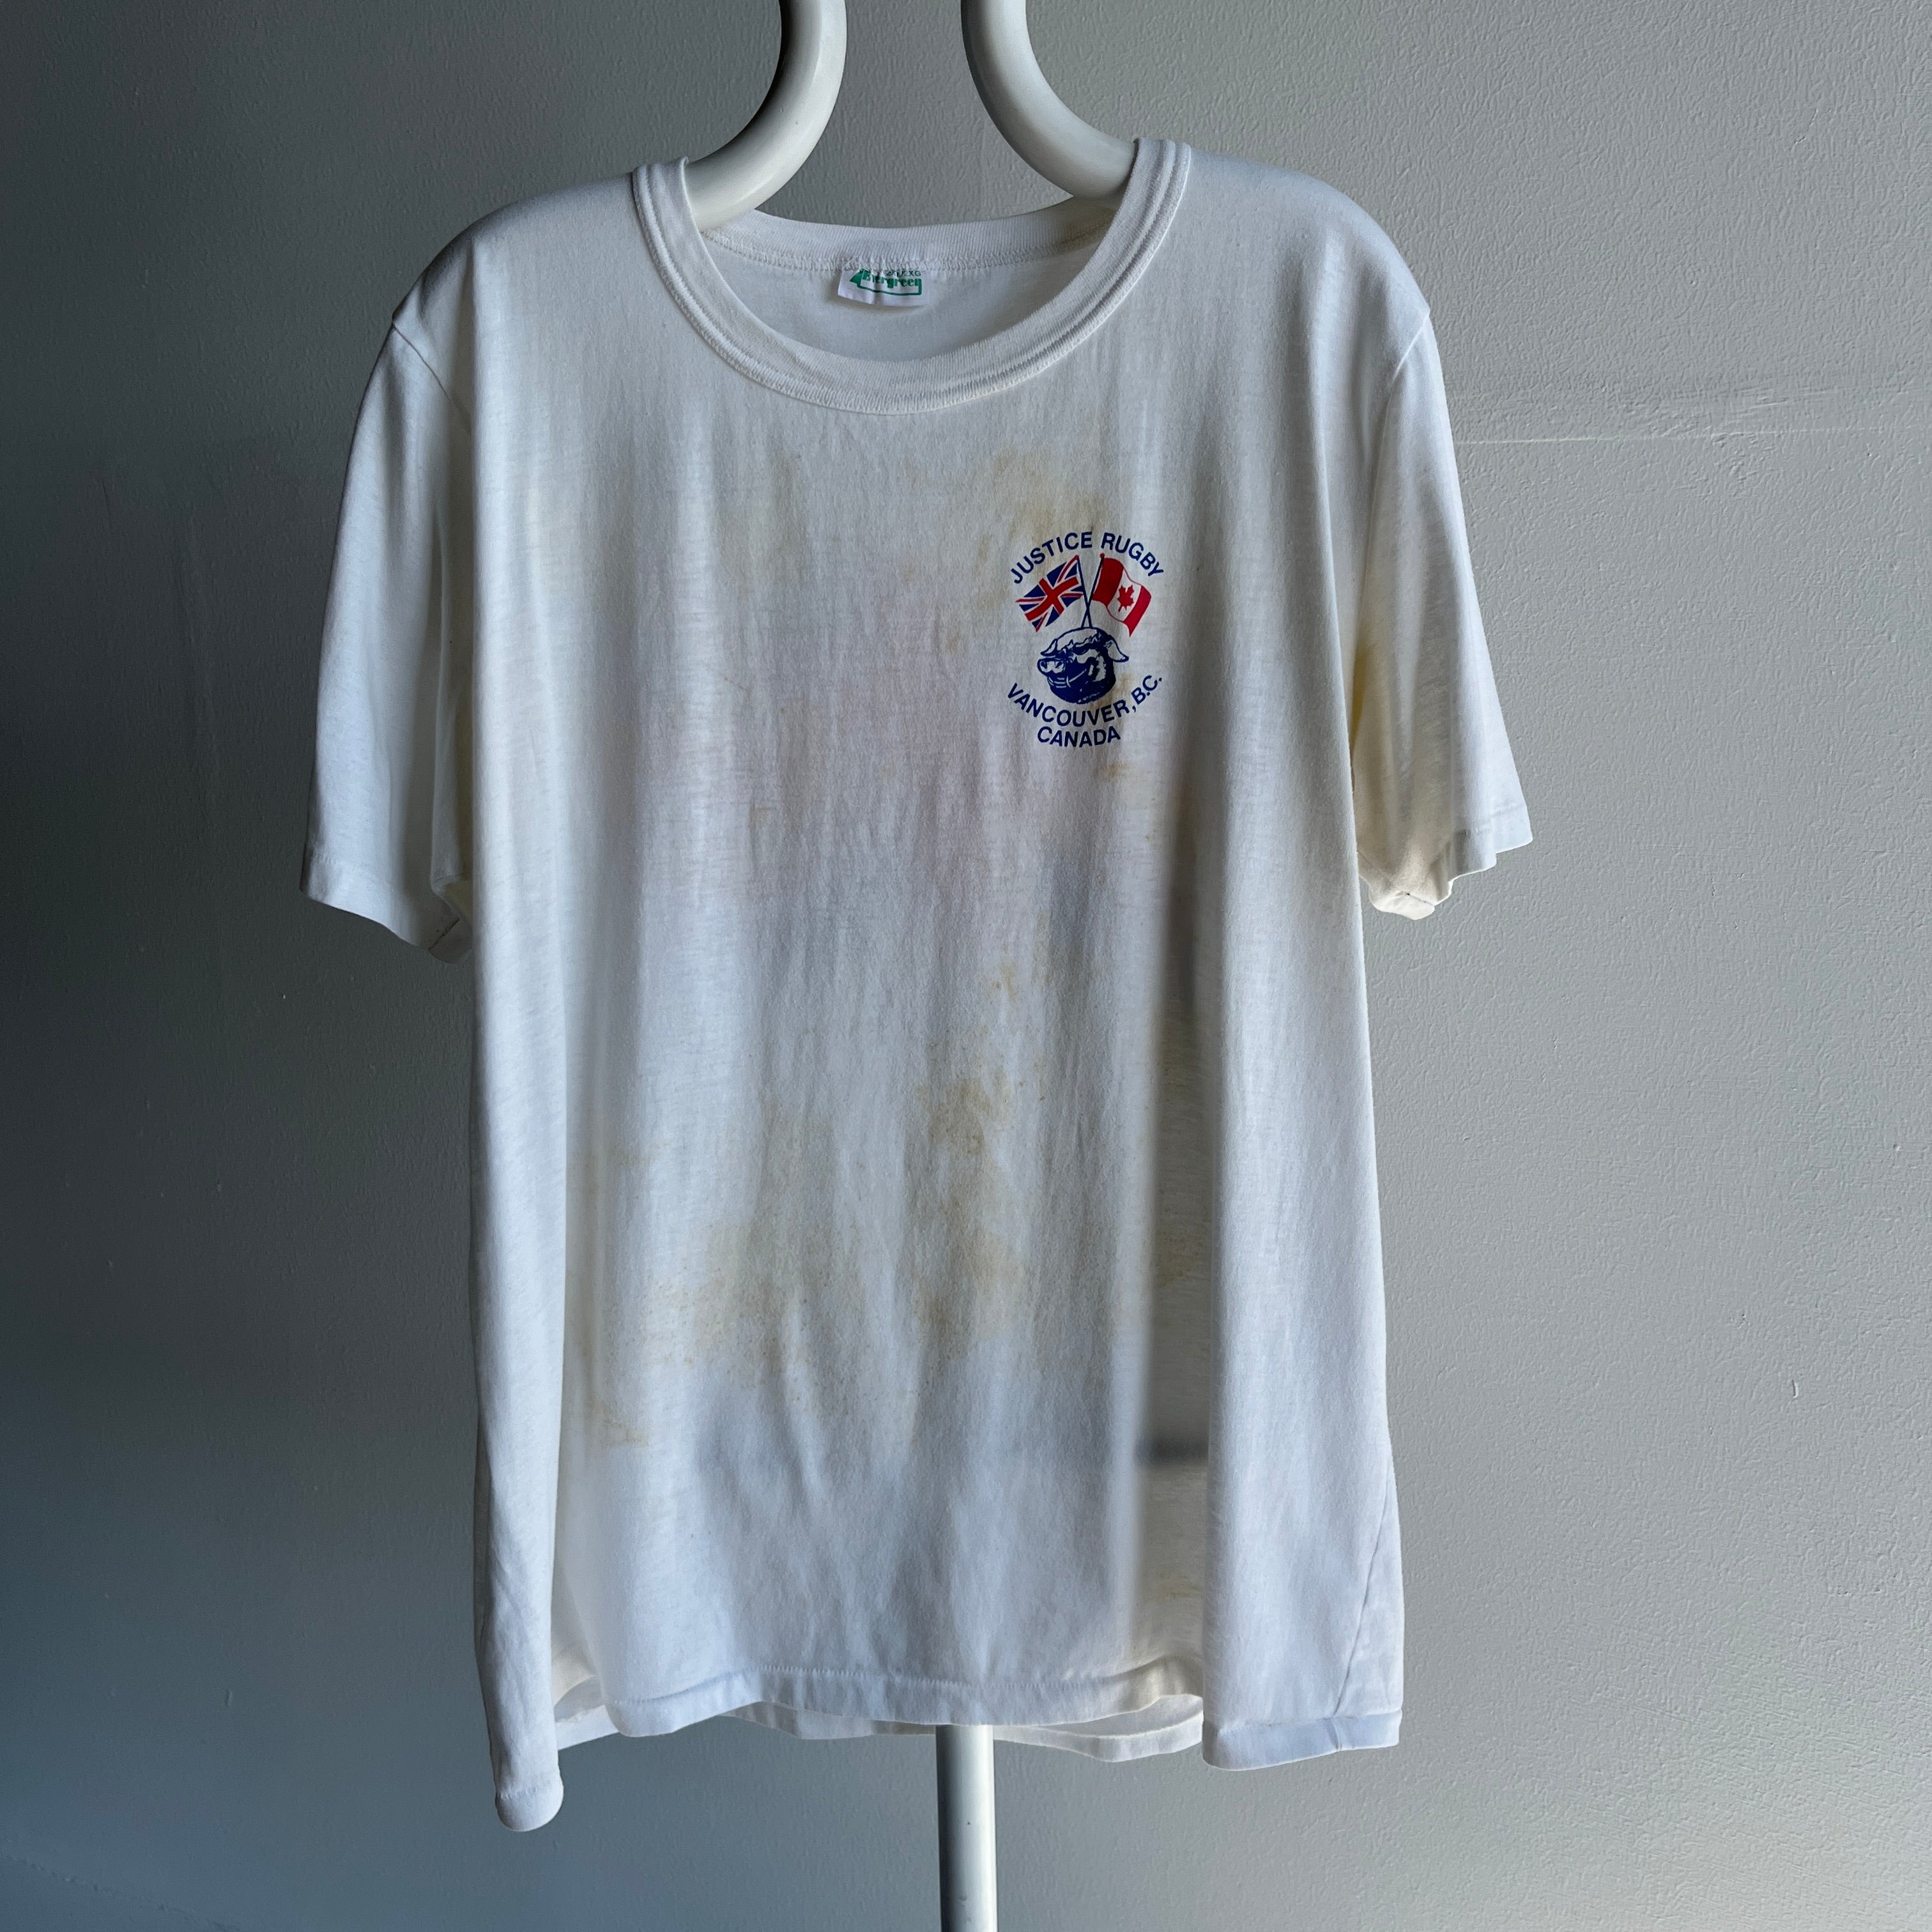 1987 Justice Rugby British Tour (The Backside) Vancouver, B.C. Canada - Super Stained